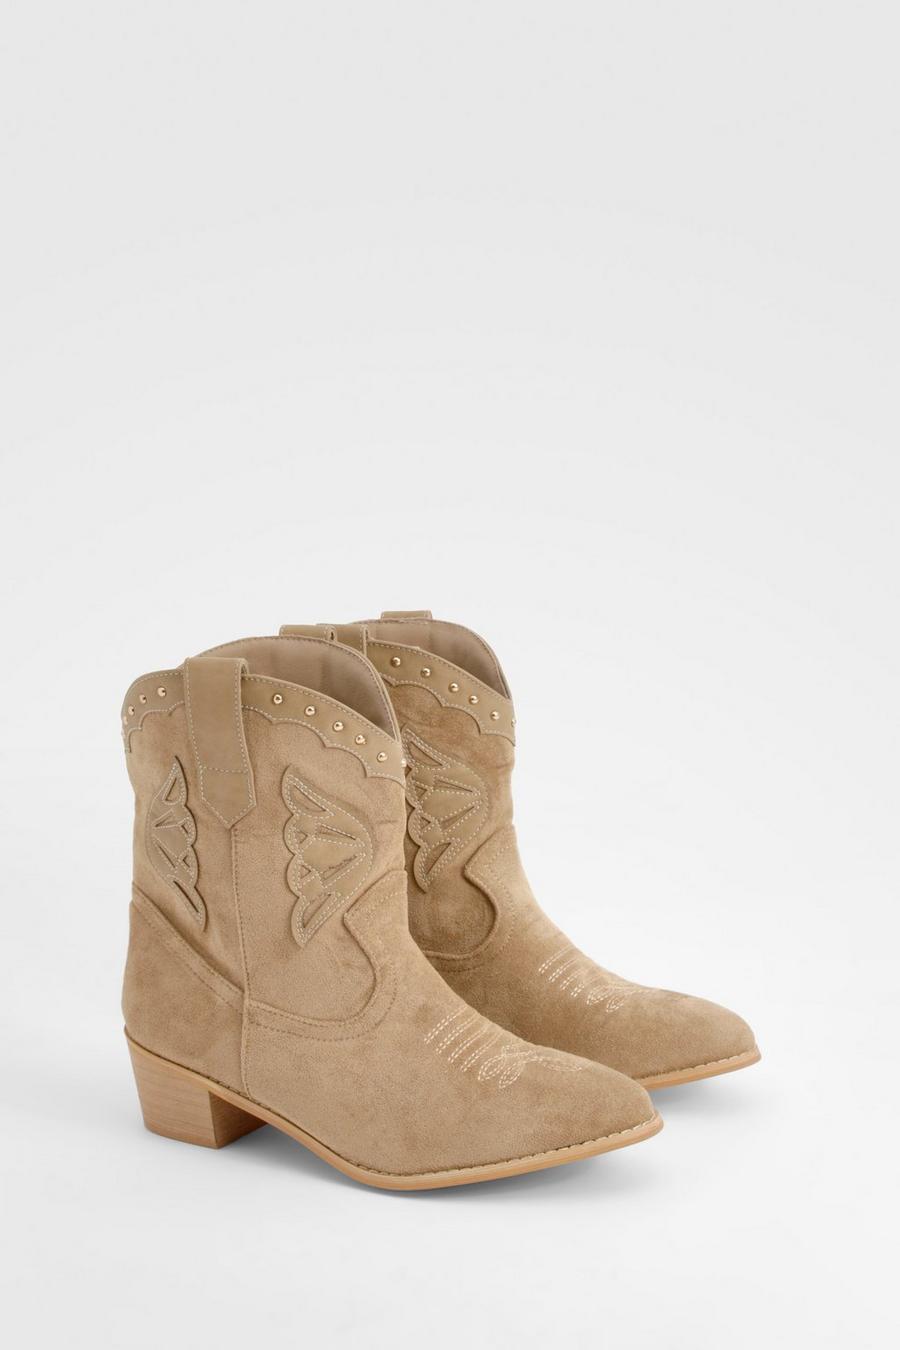 Taupe Studded Calf High Western Cowboy Boots image number 1